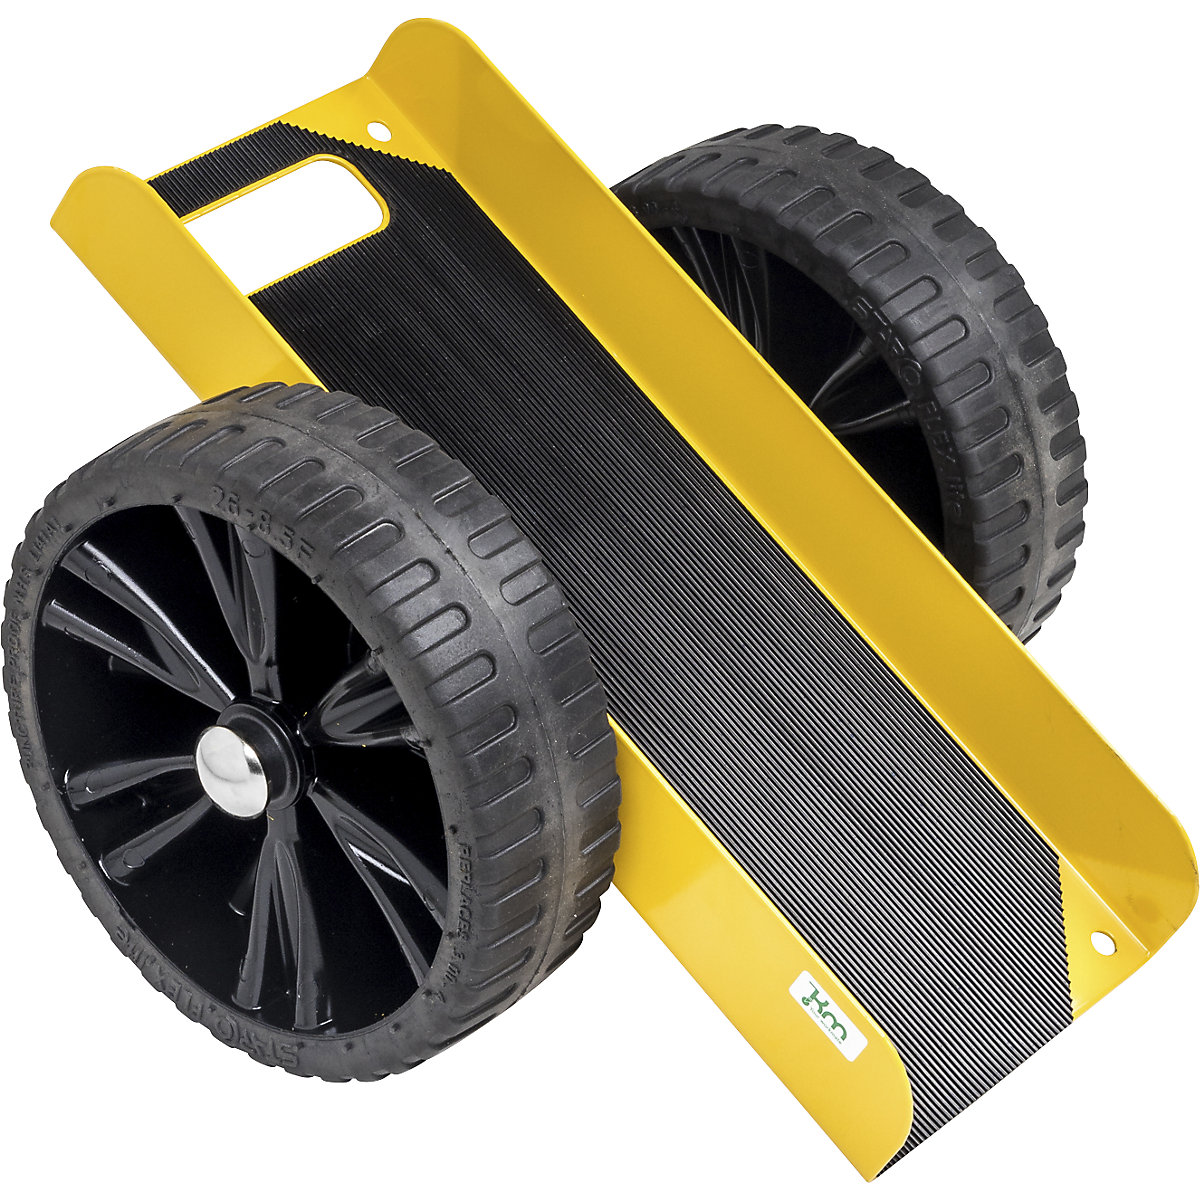 KM142650 panel dolly – Kongamek, LxWxH 490 x 380 x 260 mm, puncture proof tyres-1